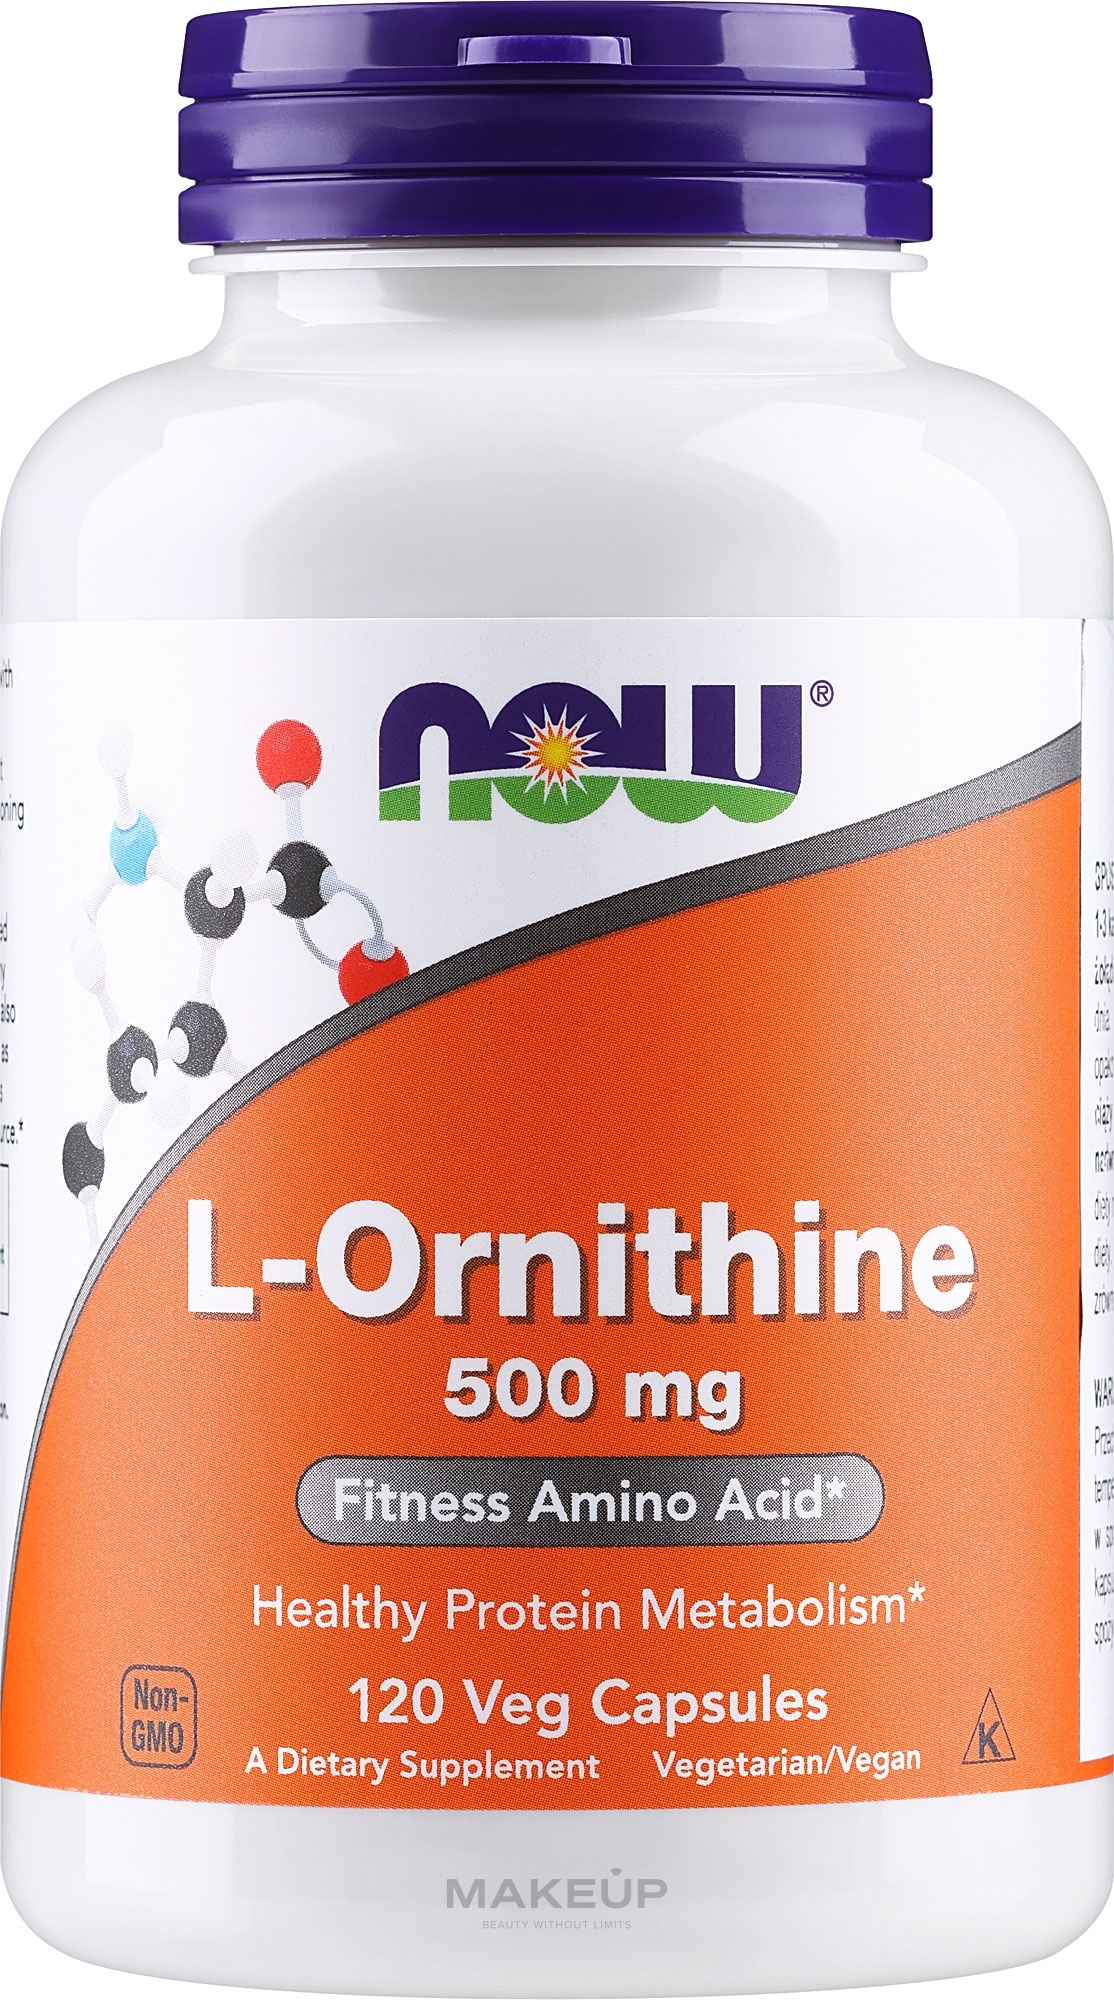 Suplement diety L-ornityna, 500 mg - Now Foods L-Ornithine Veg Capsules — Zdjęcie 120 szt.